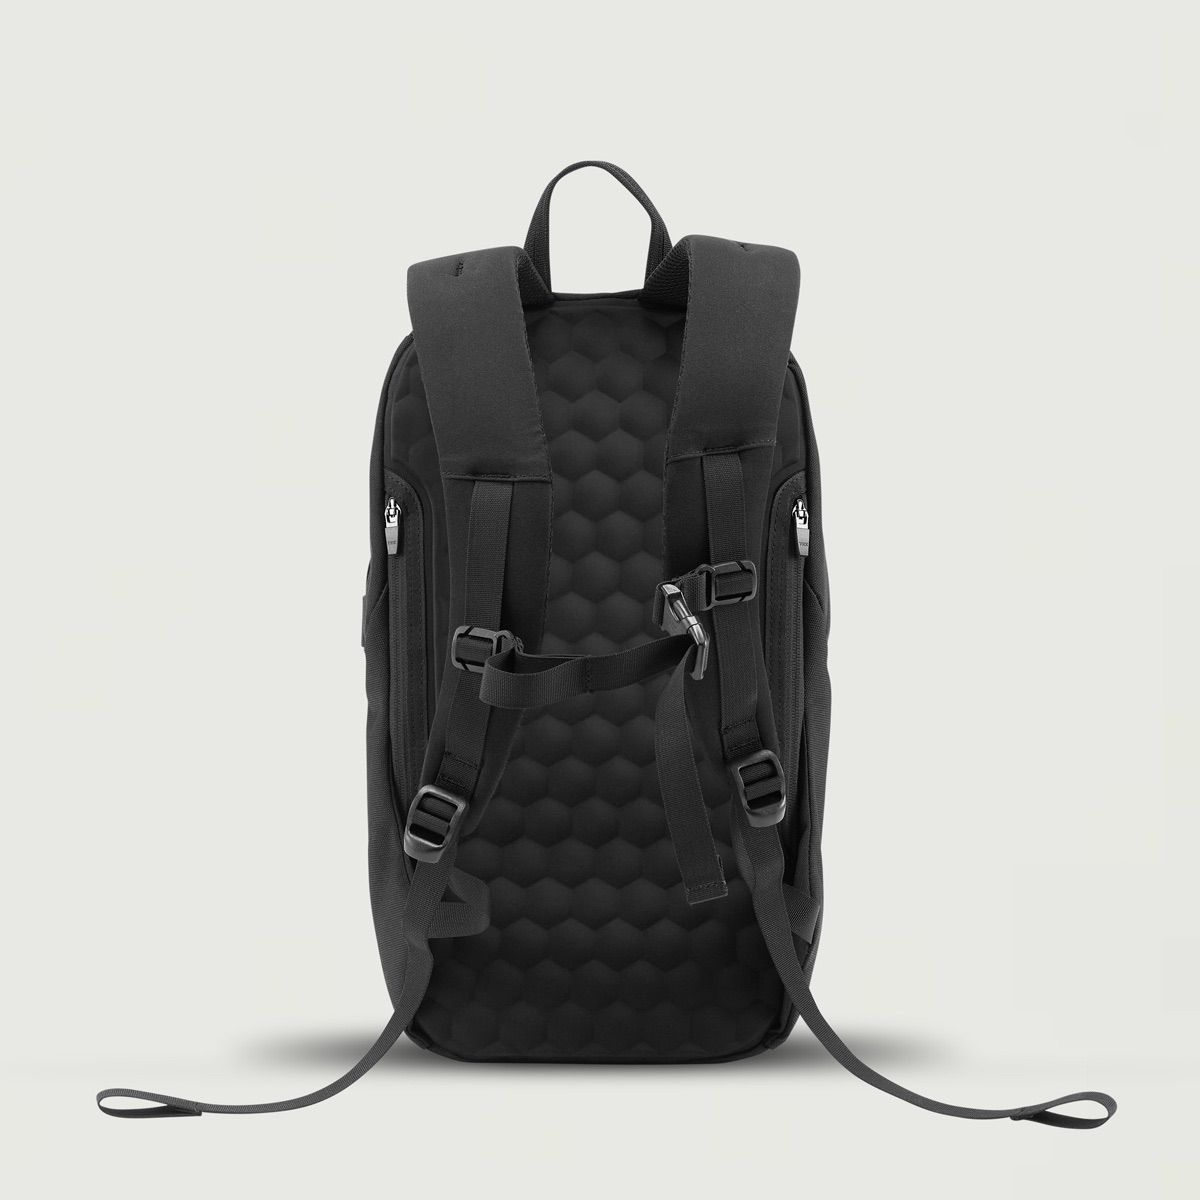 Wexley MADISON BACKPACK FULL CORDURA - リュック/バックパック